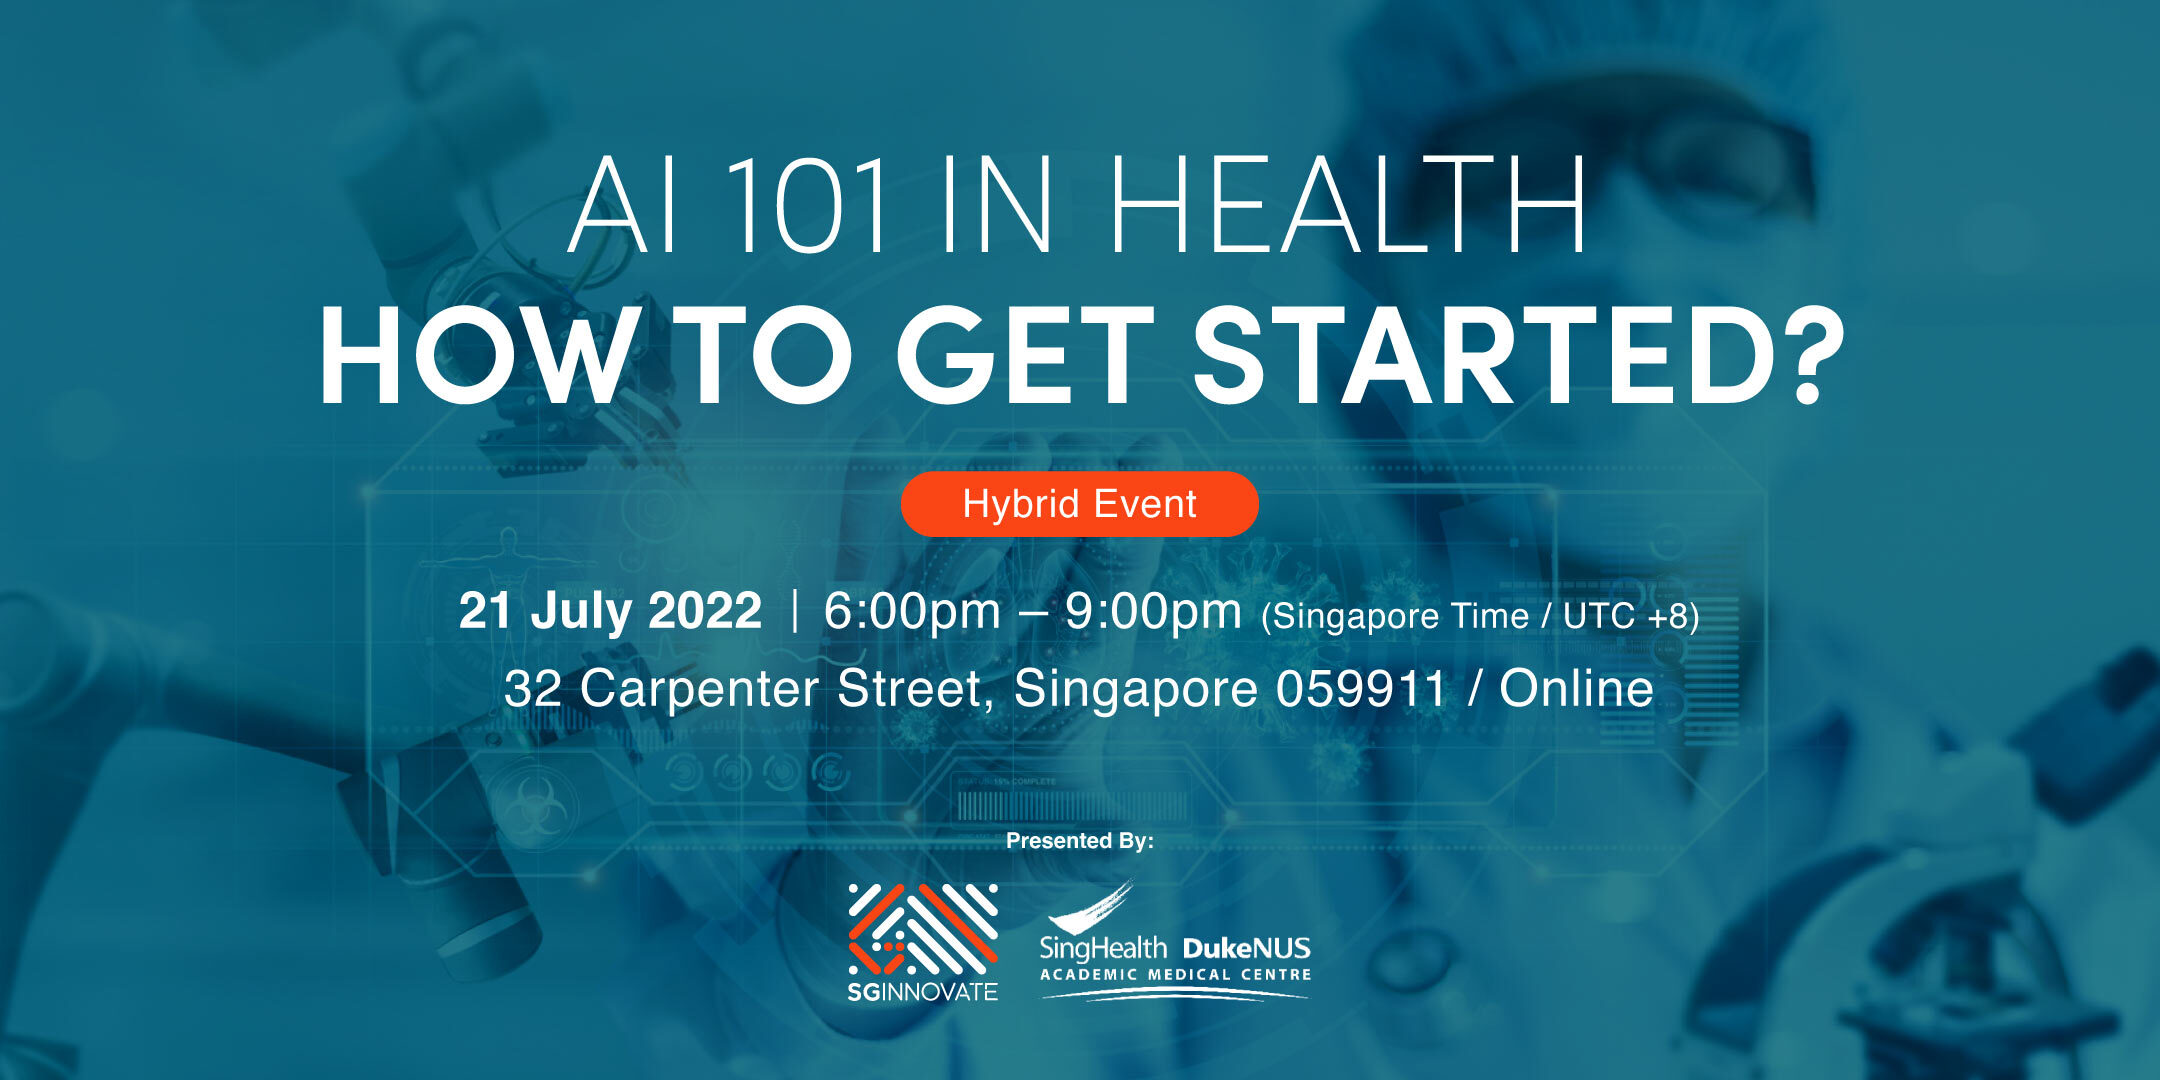 AI 101 in Health - How to Get Started?